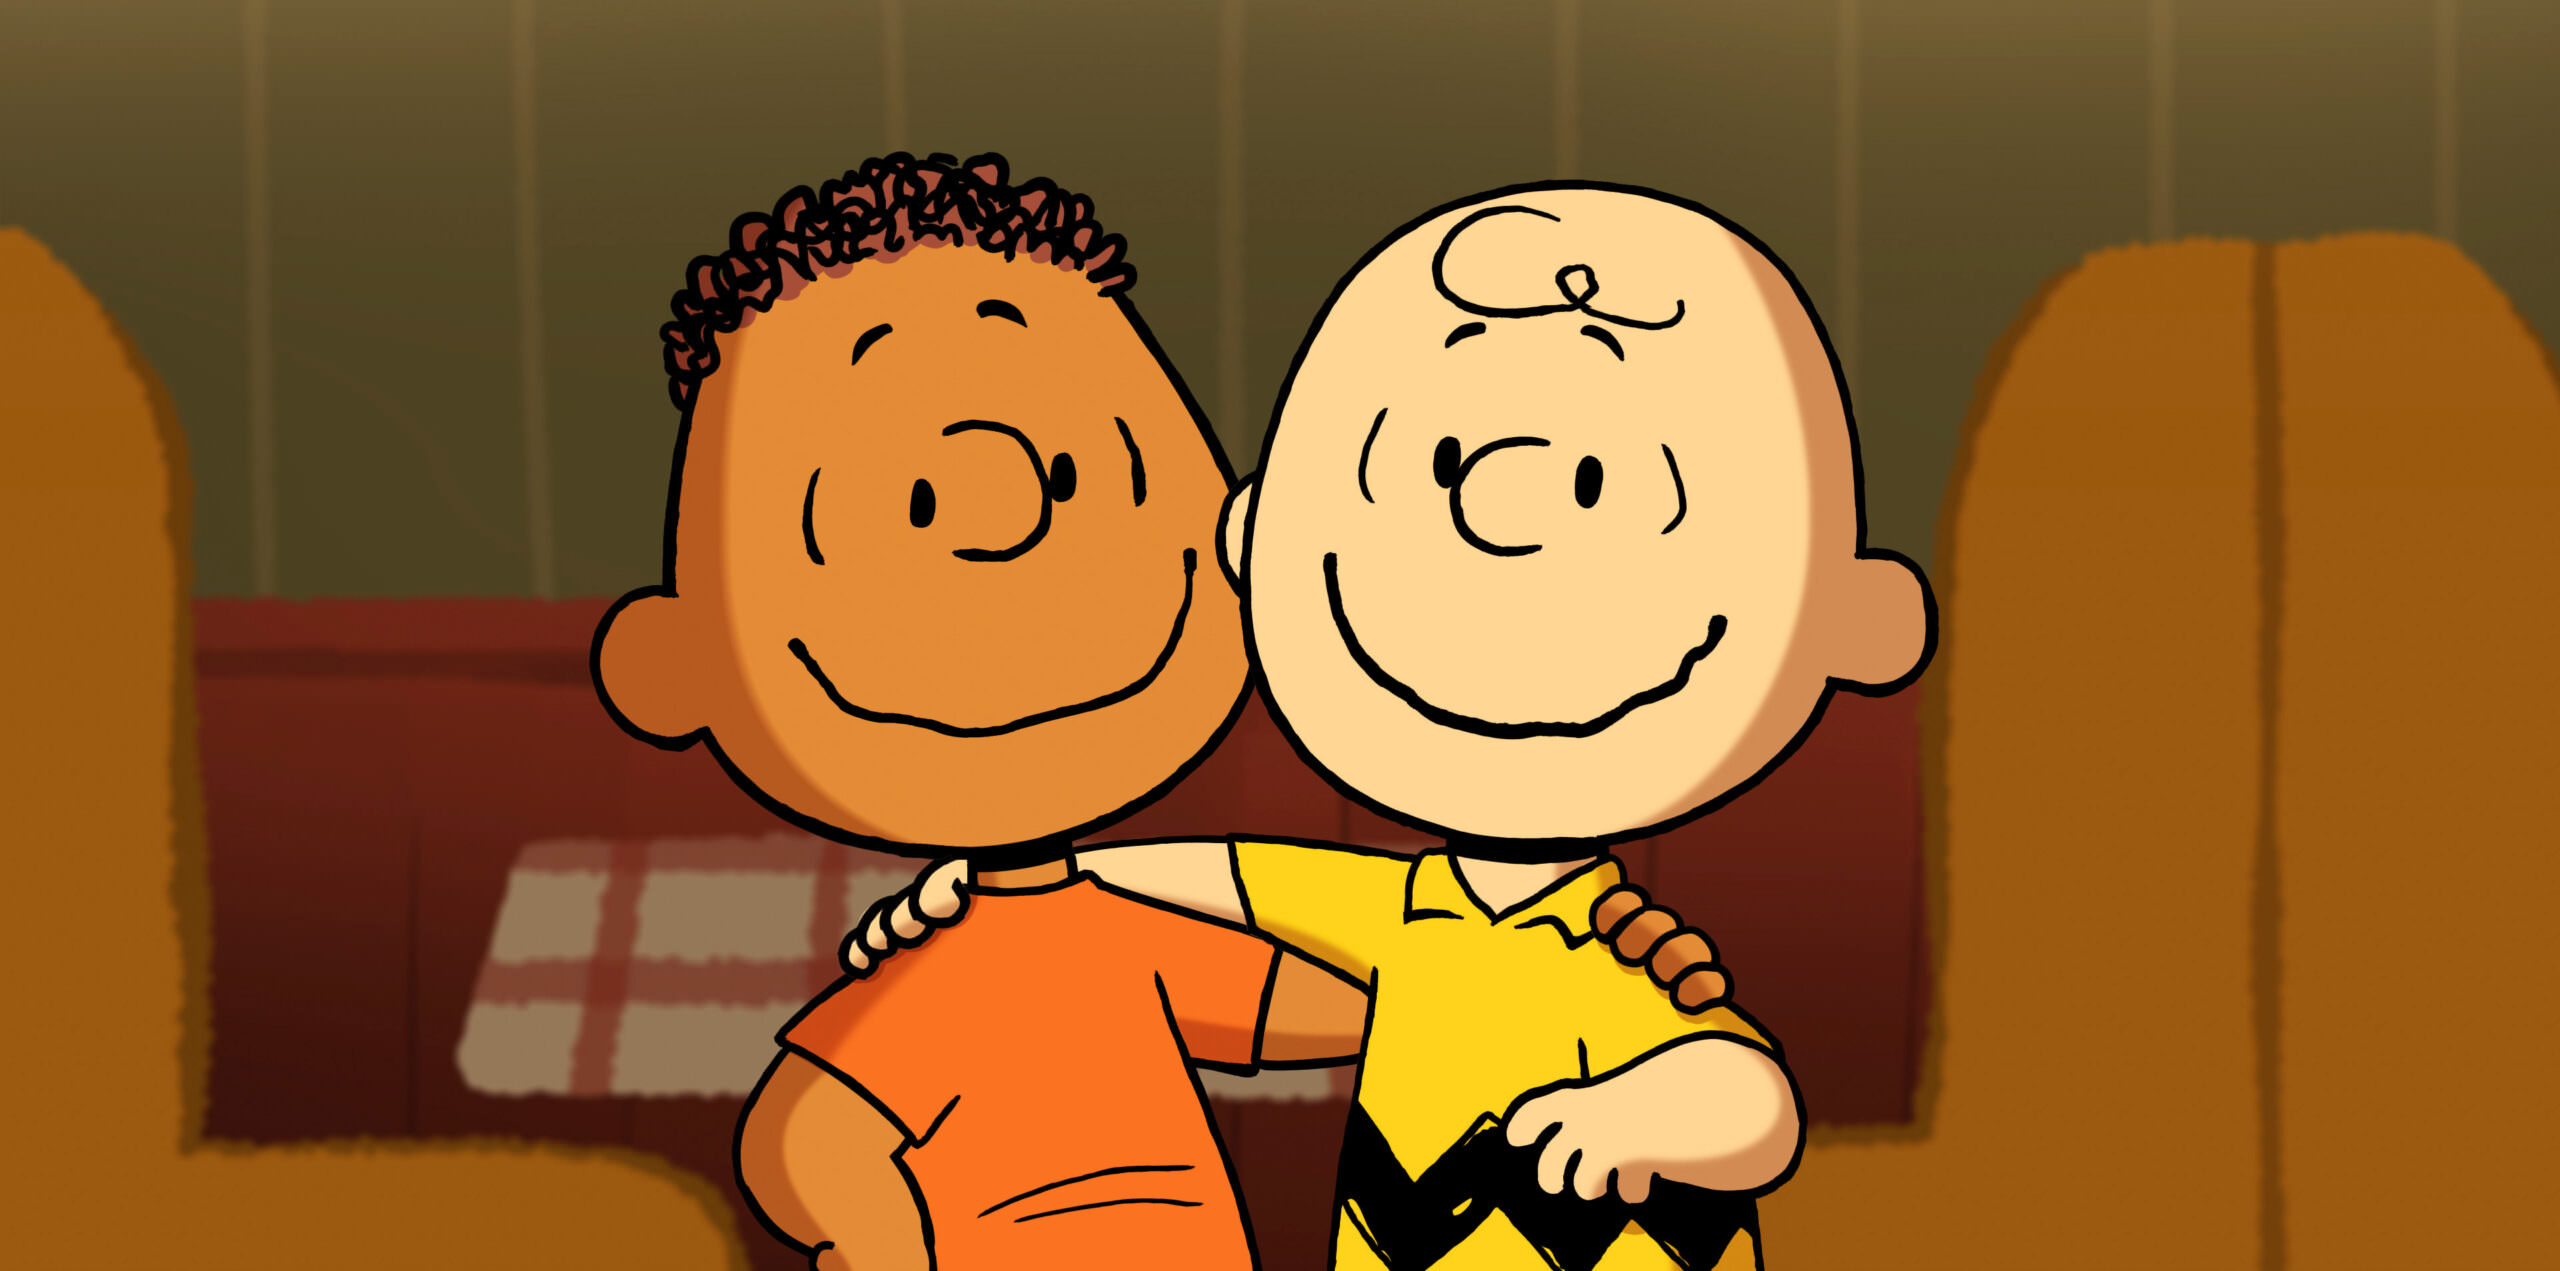 Franklin Armstrong and Charlie Brown in "Snoopy Presents: Welcome Home, Franklin," premiering February 16, 2024 on Apple TV+.